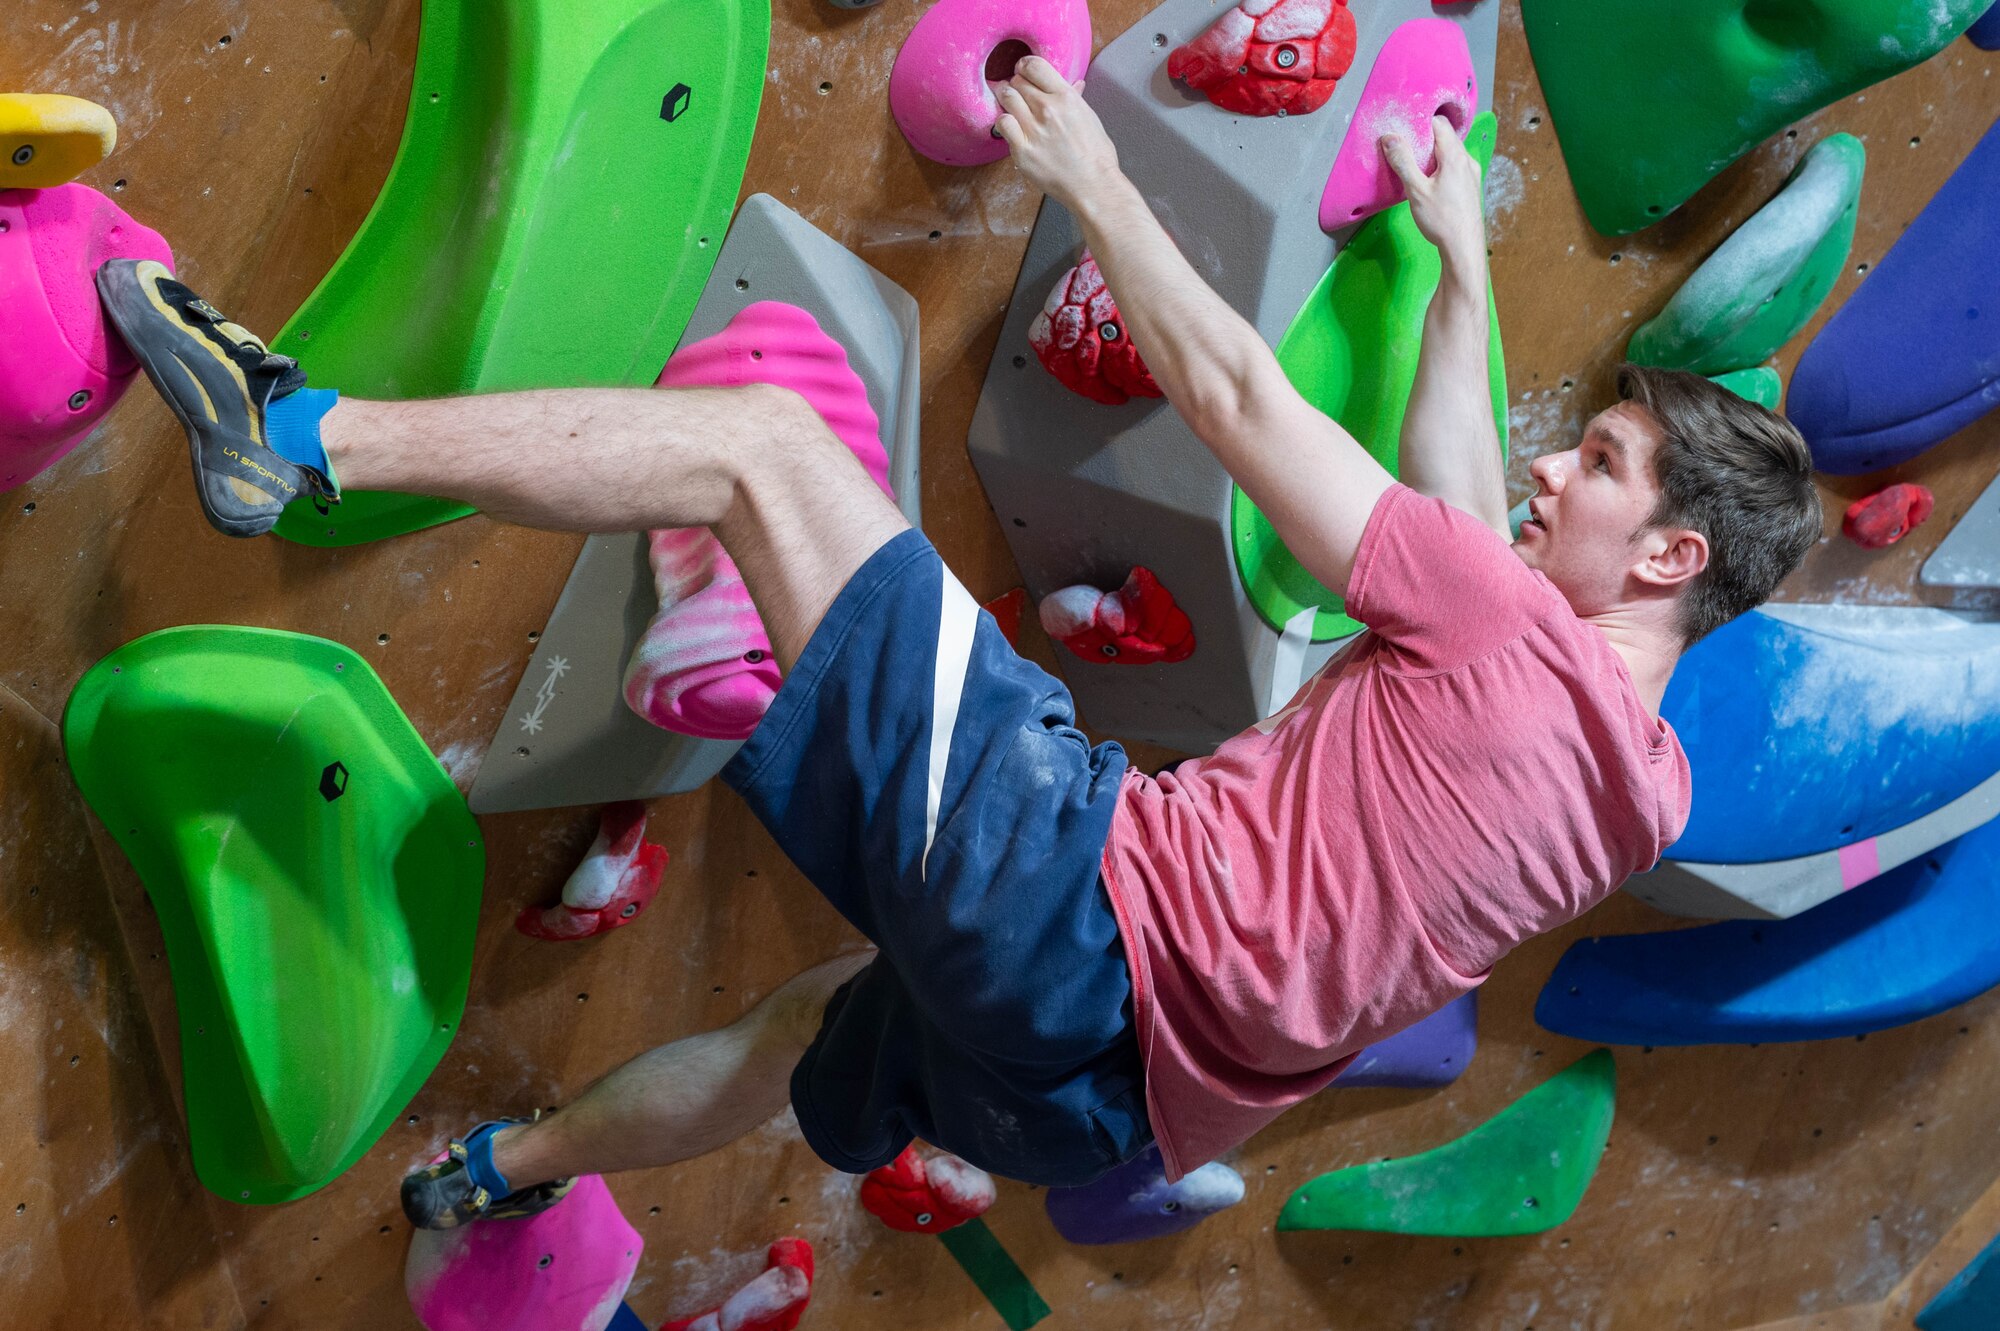 U.S. Air Force Senior Airman Bryce Reash, 51st Fighter Wing finance technician, climbs a bouldering wall during a resilience building event at the Mountain Ground rock climbing gym in Dongtan-Daero, Republic of Korea, Dec. 15, 2023. The chapel conducted surveys before and after the event to determine how to better care for the Airmen on base and tend to their needs in the future. (U.S. Air Force photo by Airman 1st Class Chase Verzaal)